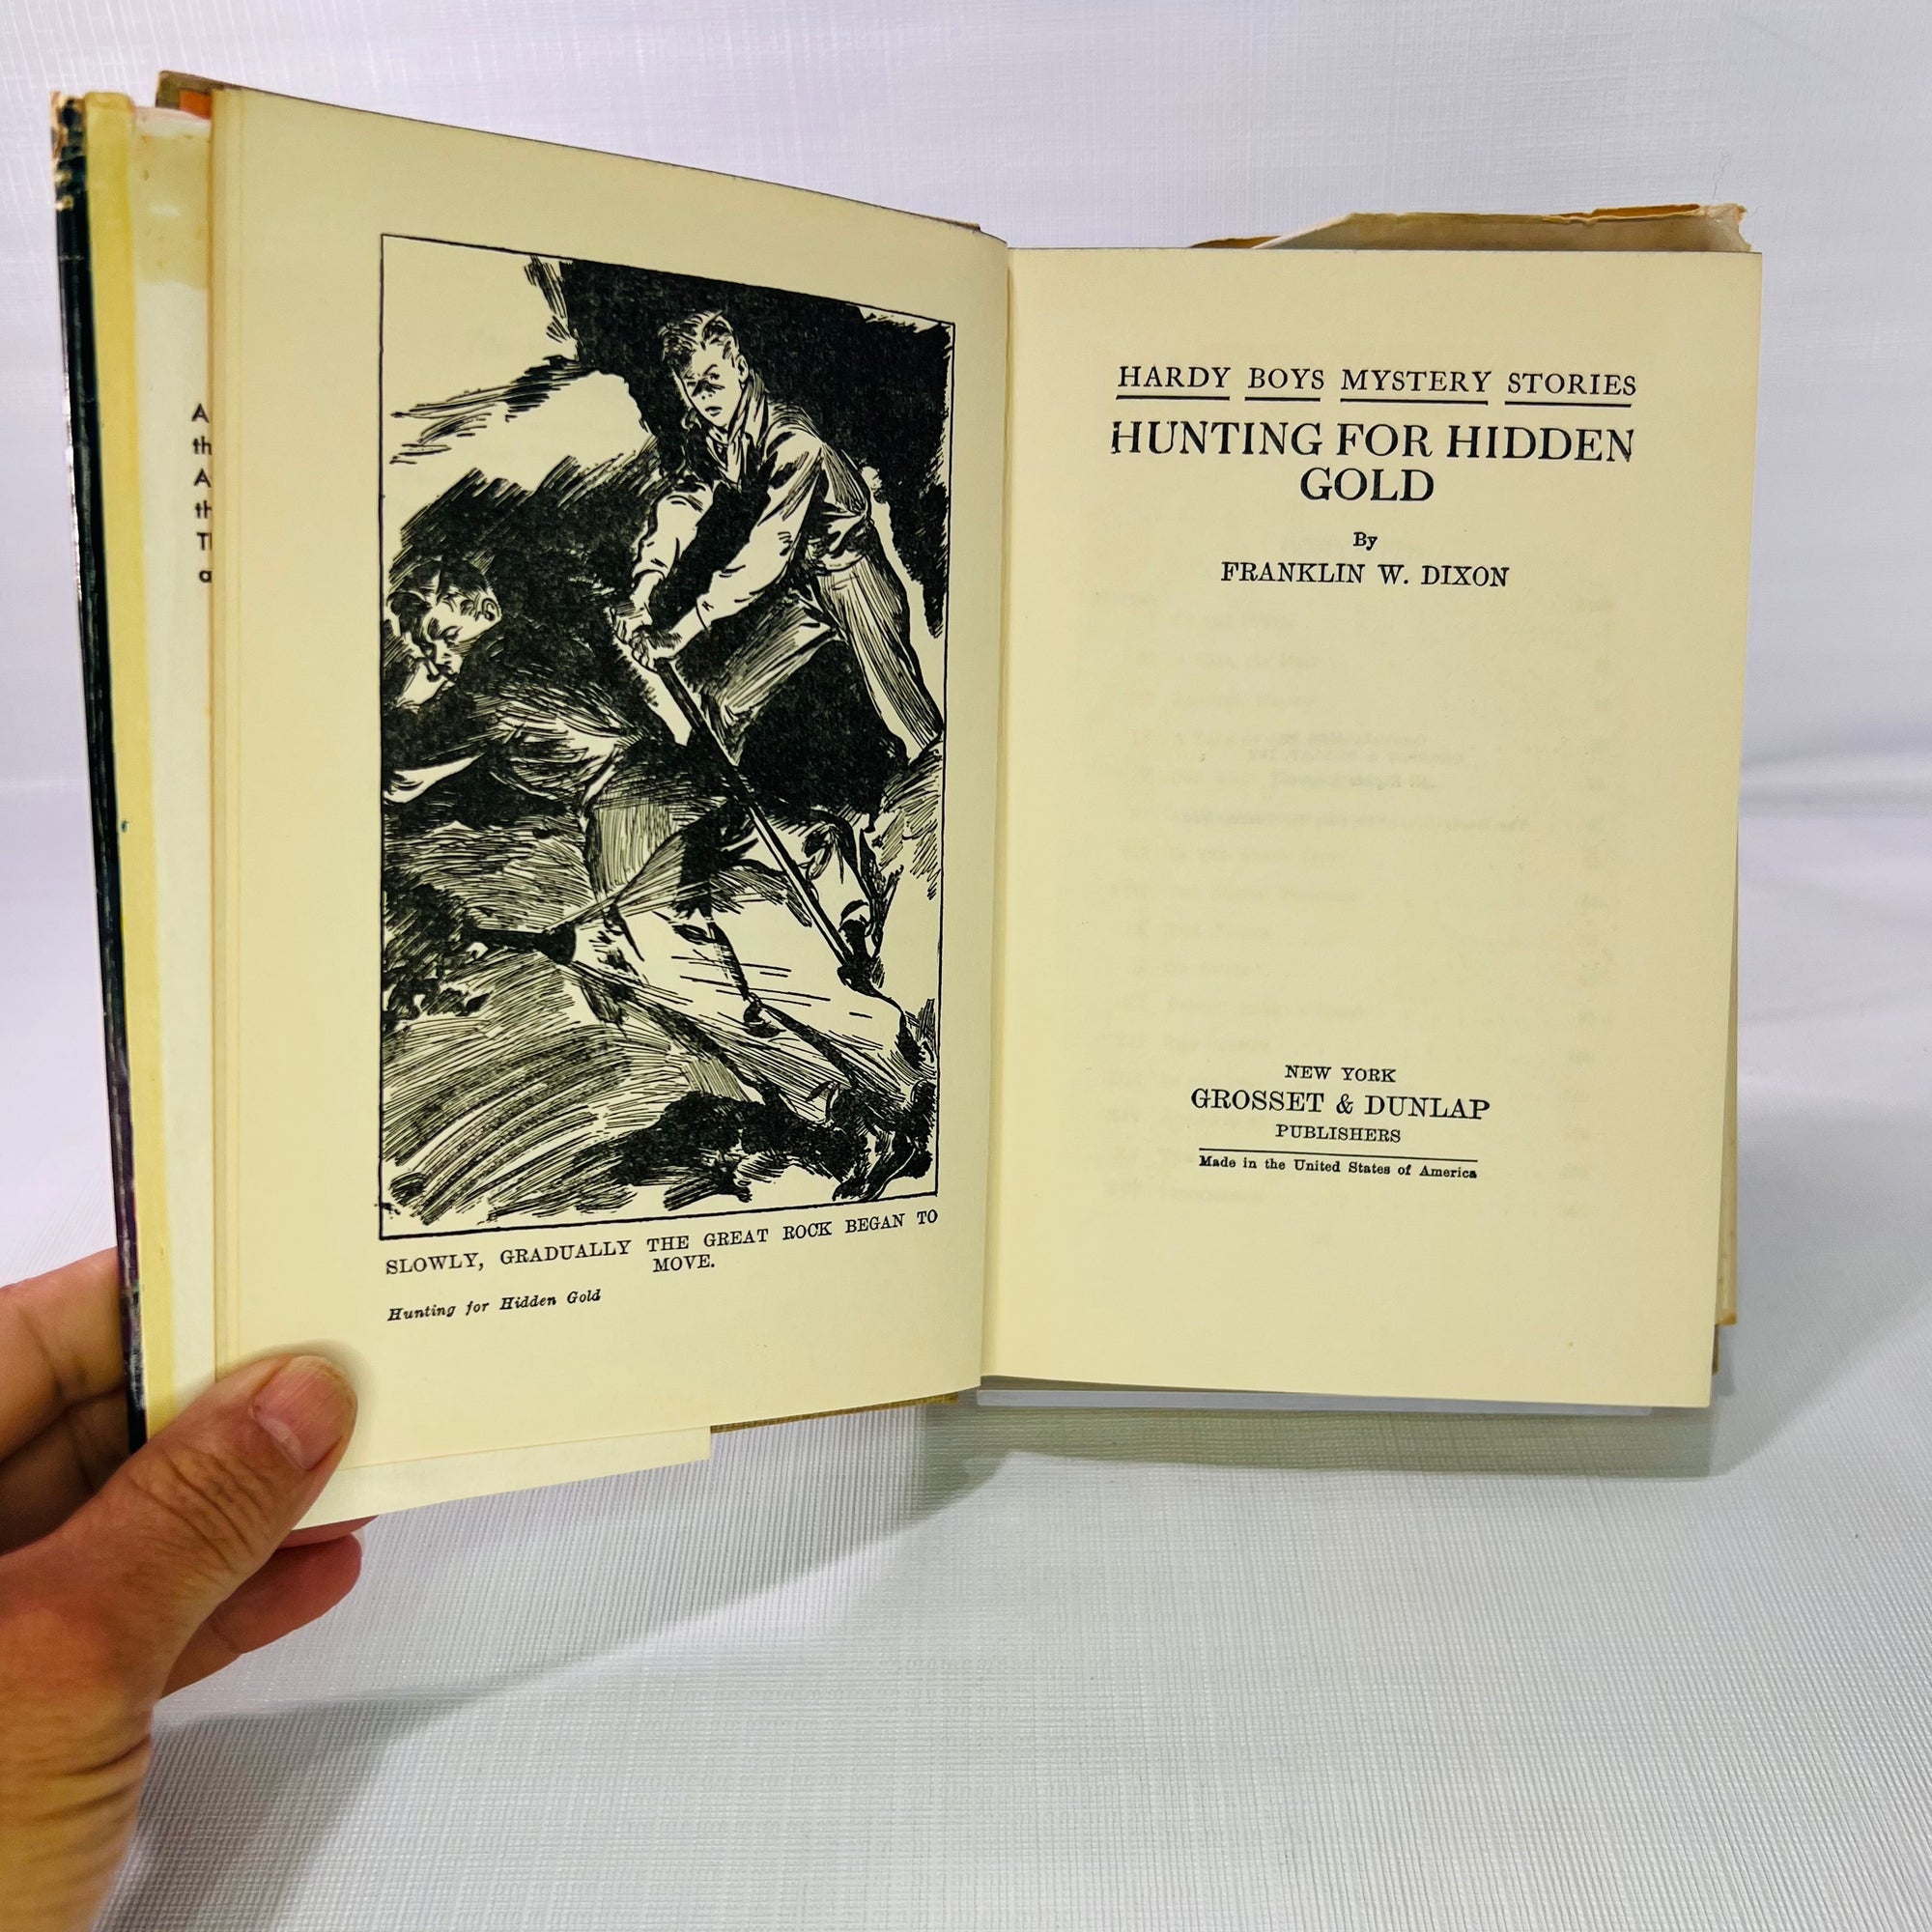 The Hardy Boys Hunting for Hidden Gold by Franklin W. Dixon 1928 Grosset & Dunlap Publishers